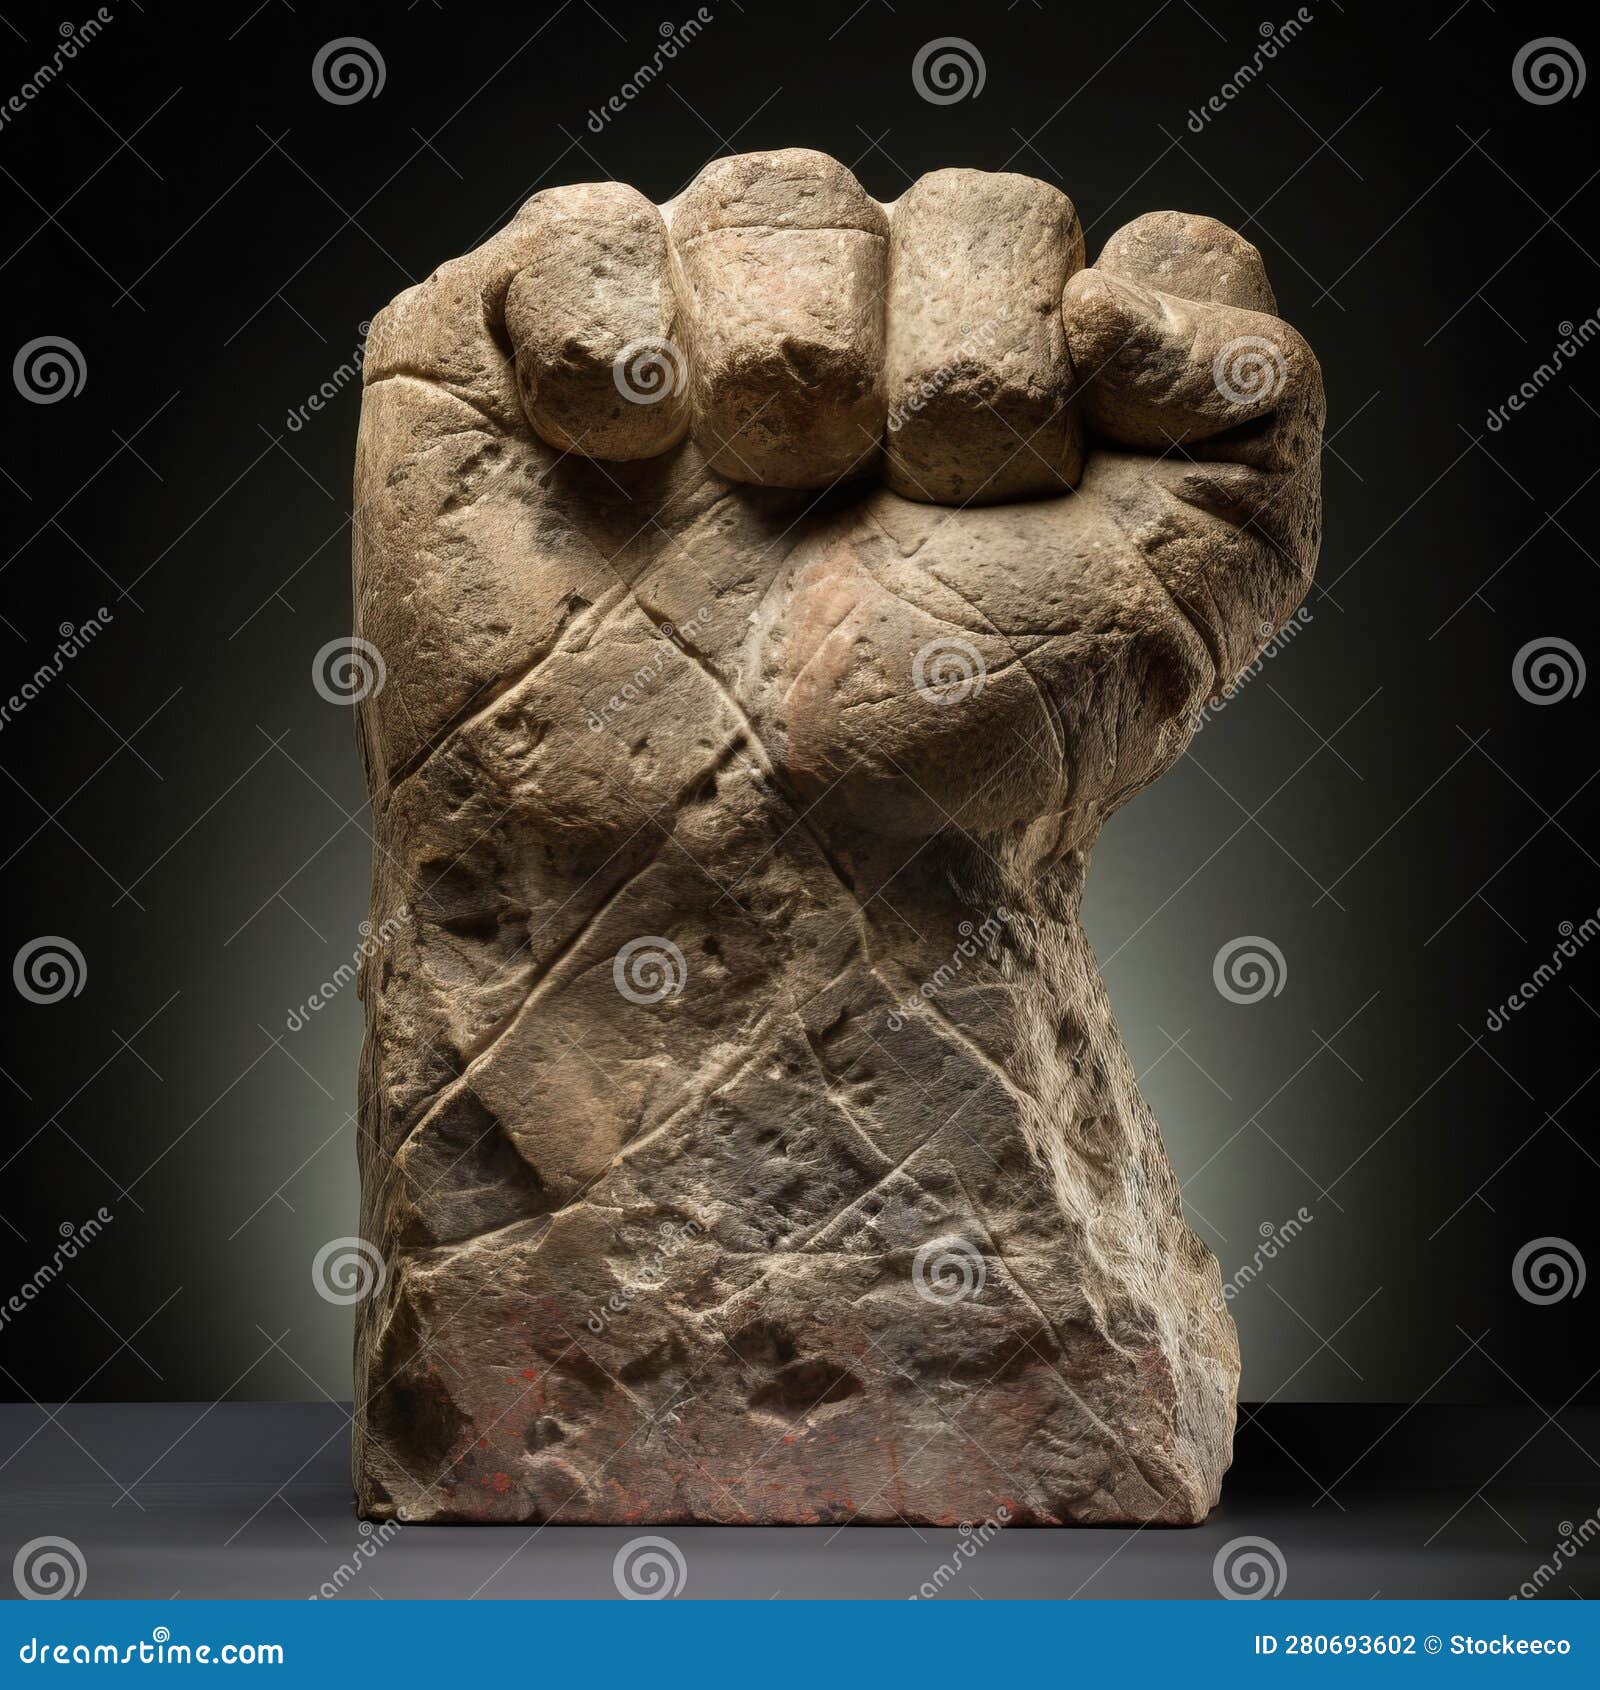 stone fist sculpture in the style of incisioni series